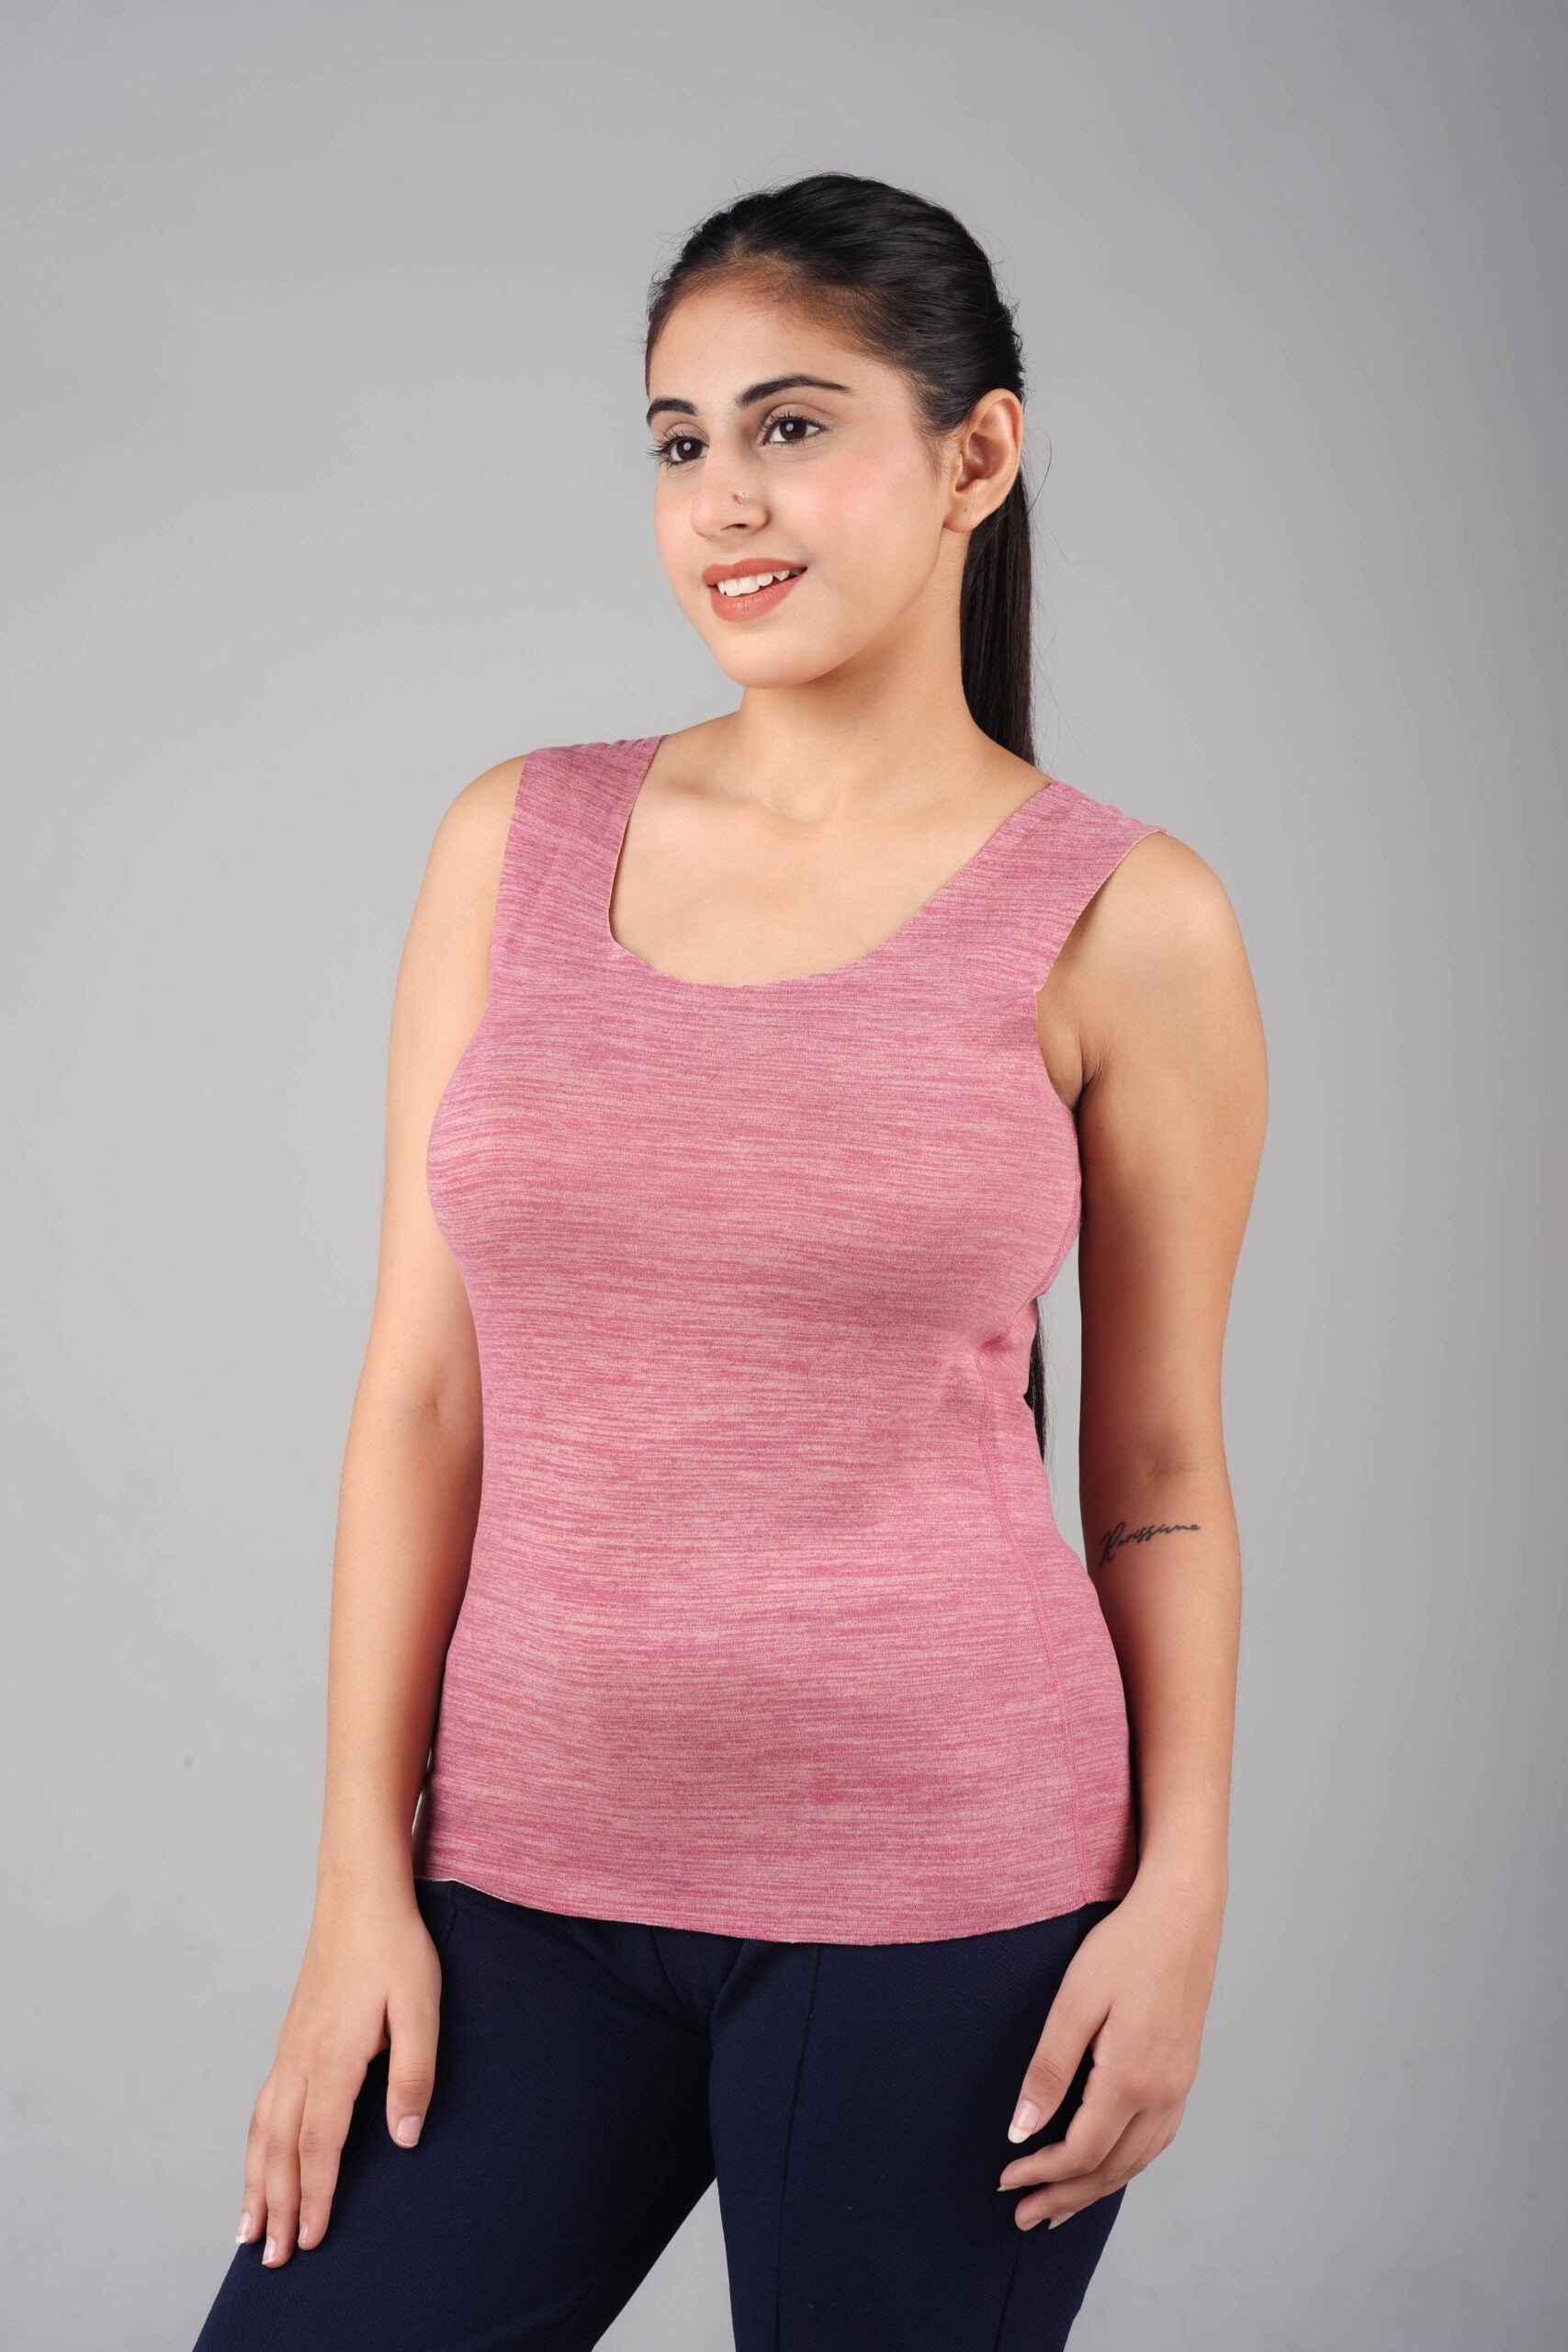 Dry-Fit Tank Top with Fur Inside (Hot Pink) Elevate Your Workout